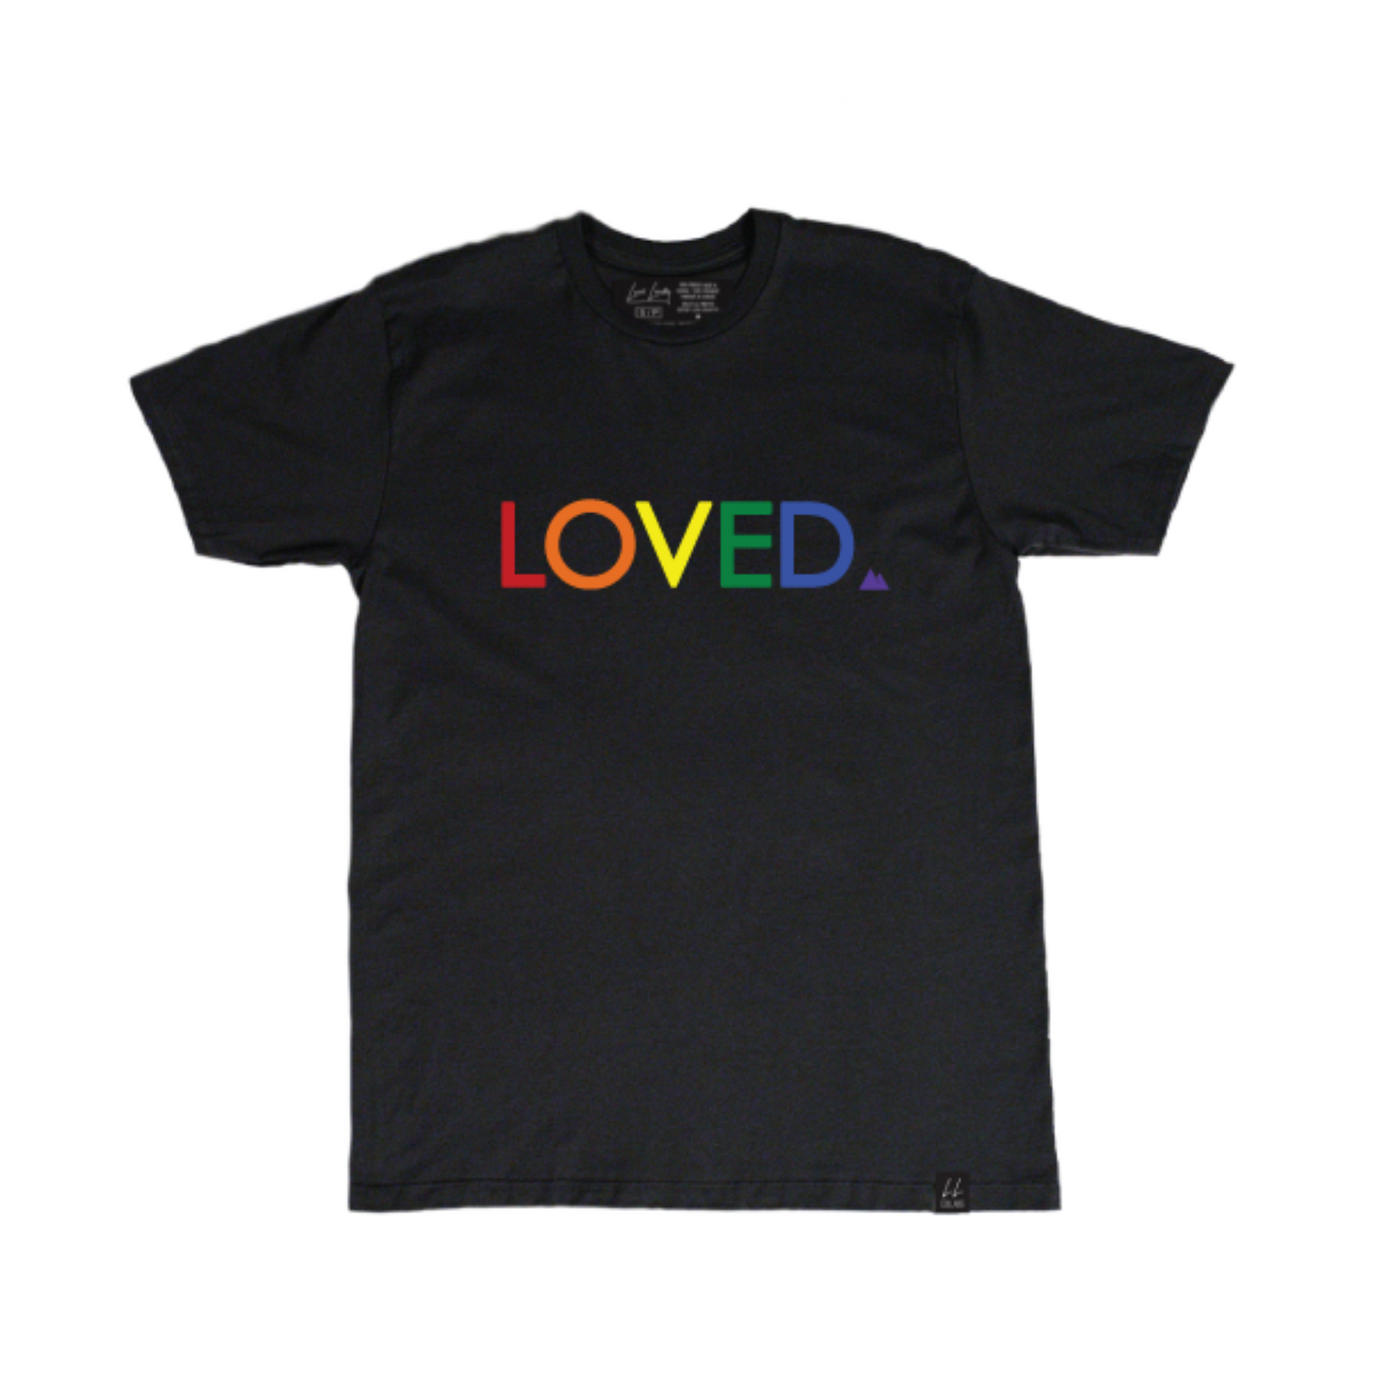 LOVED. Bamboo T-Shirt - Black 🇨🇦 - Local Laundry